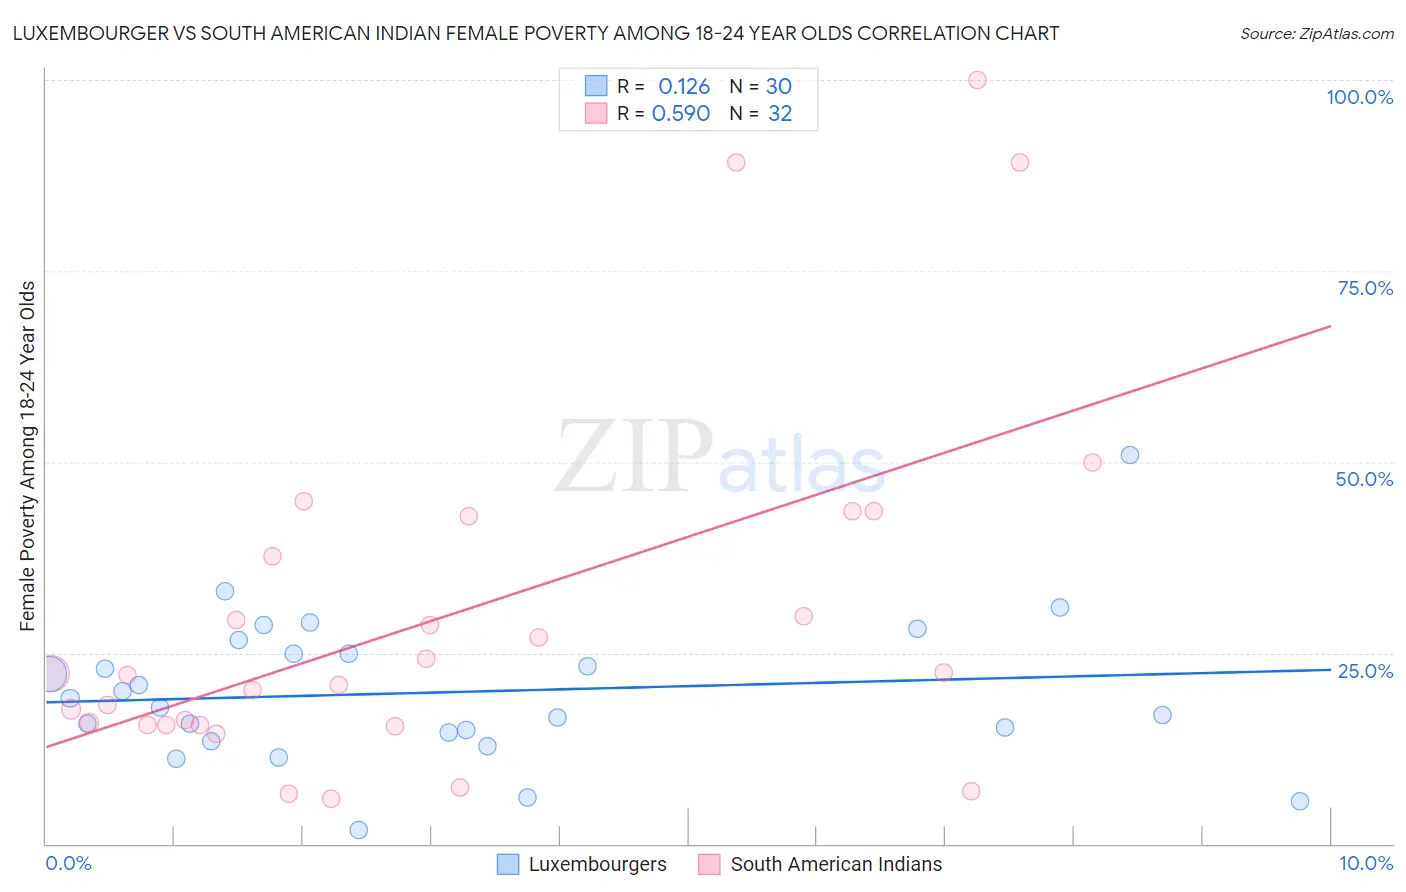 Luxembourger vs South American Indian Female Poverty Among 18-24 Year Olds